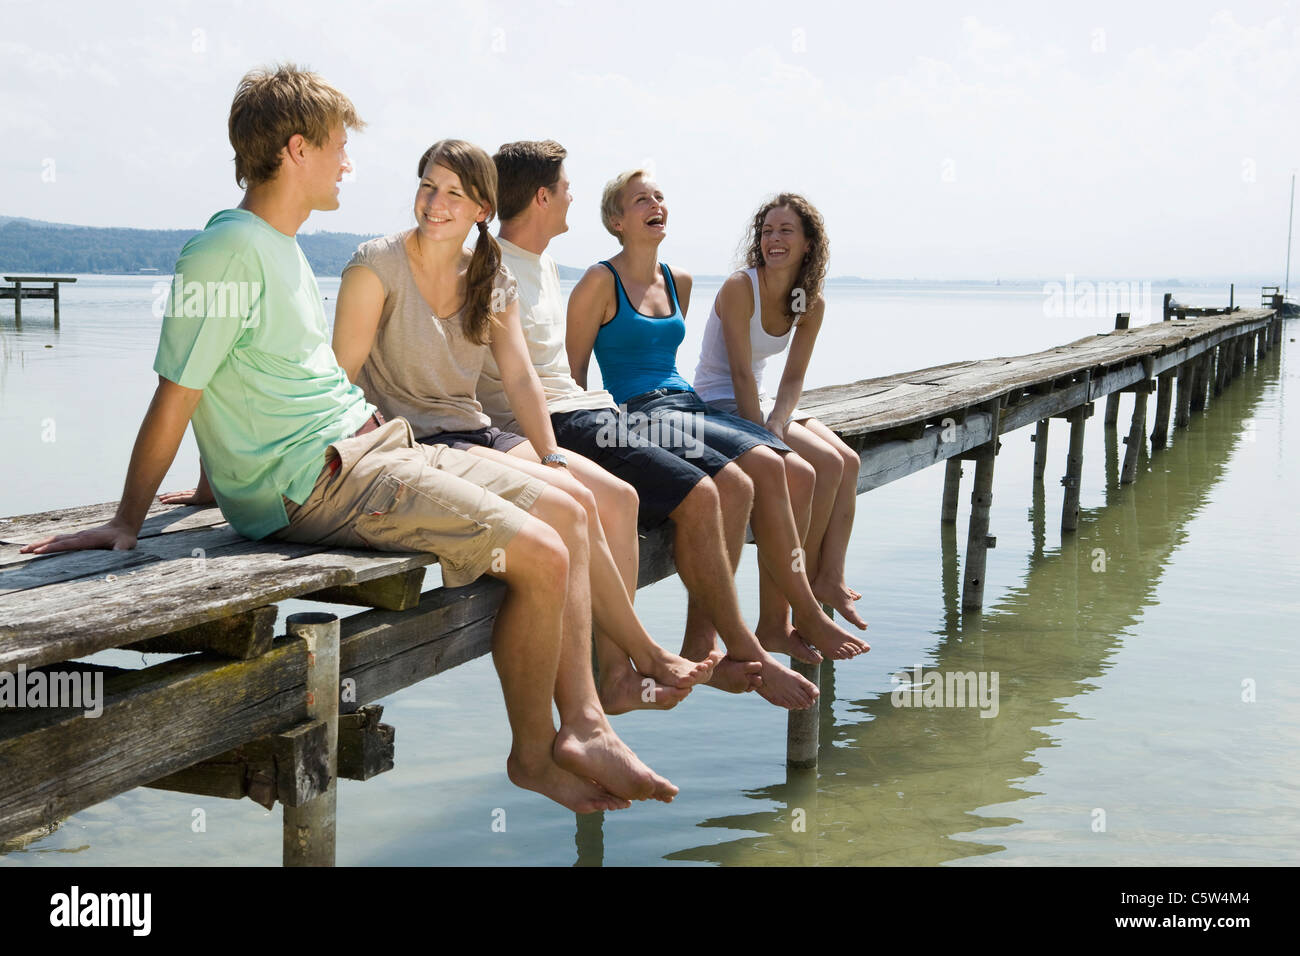 Germany, Bavaria, Ammersee, Young people relaxing on jetty Stock Photo